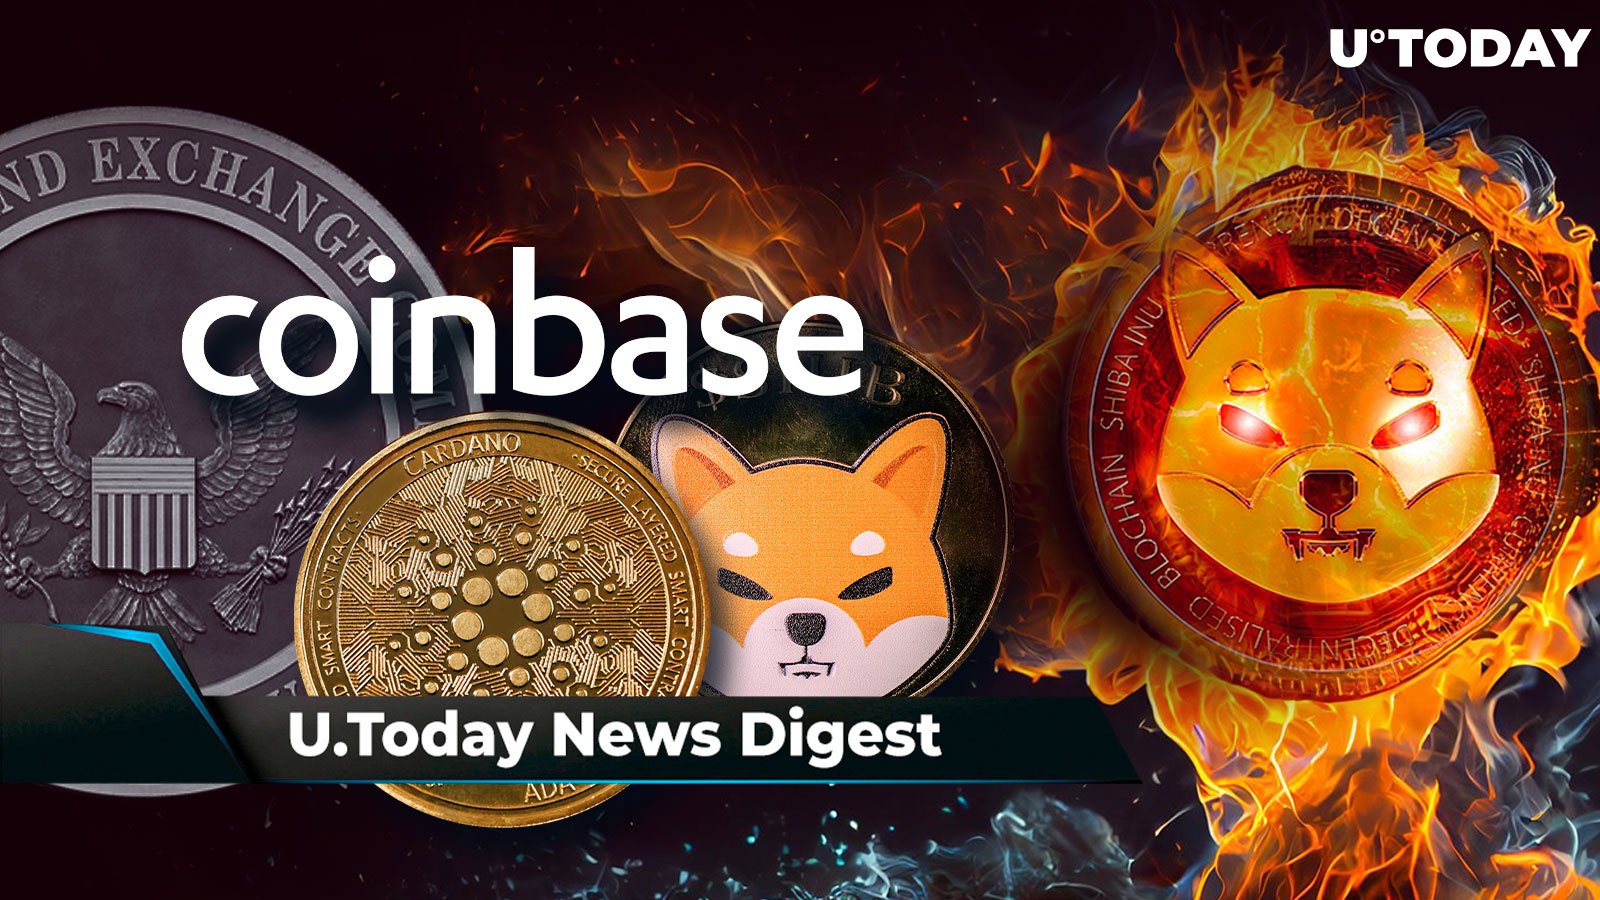 SEC Wanted Coinbase to Delist SHIB, ADA and Other Altcoins, Shibarium Hackathon Announced, SHIB's Double Burn Rate Sparks Price Surge: Crypto News Digest by U.Today